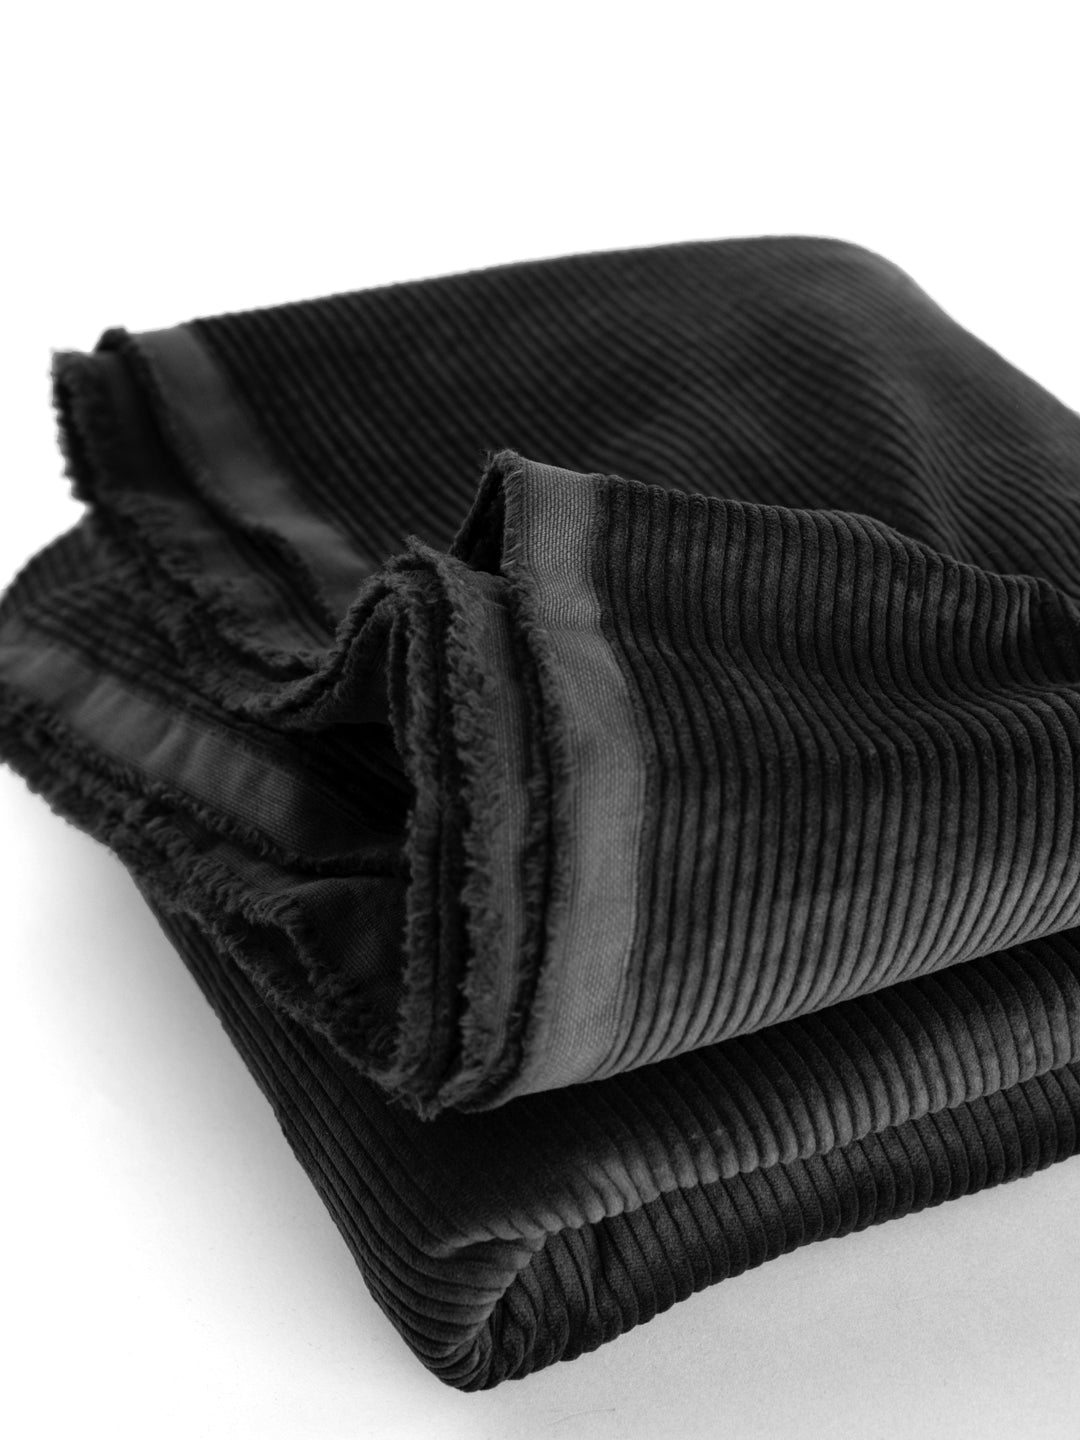 Chunky wide wale corduroy in Black, 100% natural cotton fiber